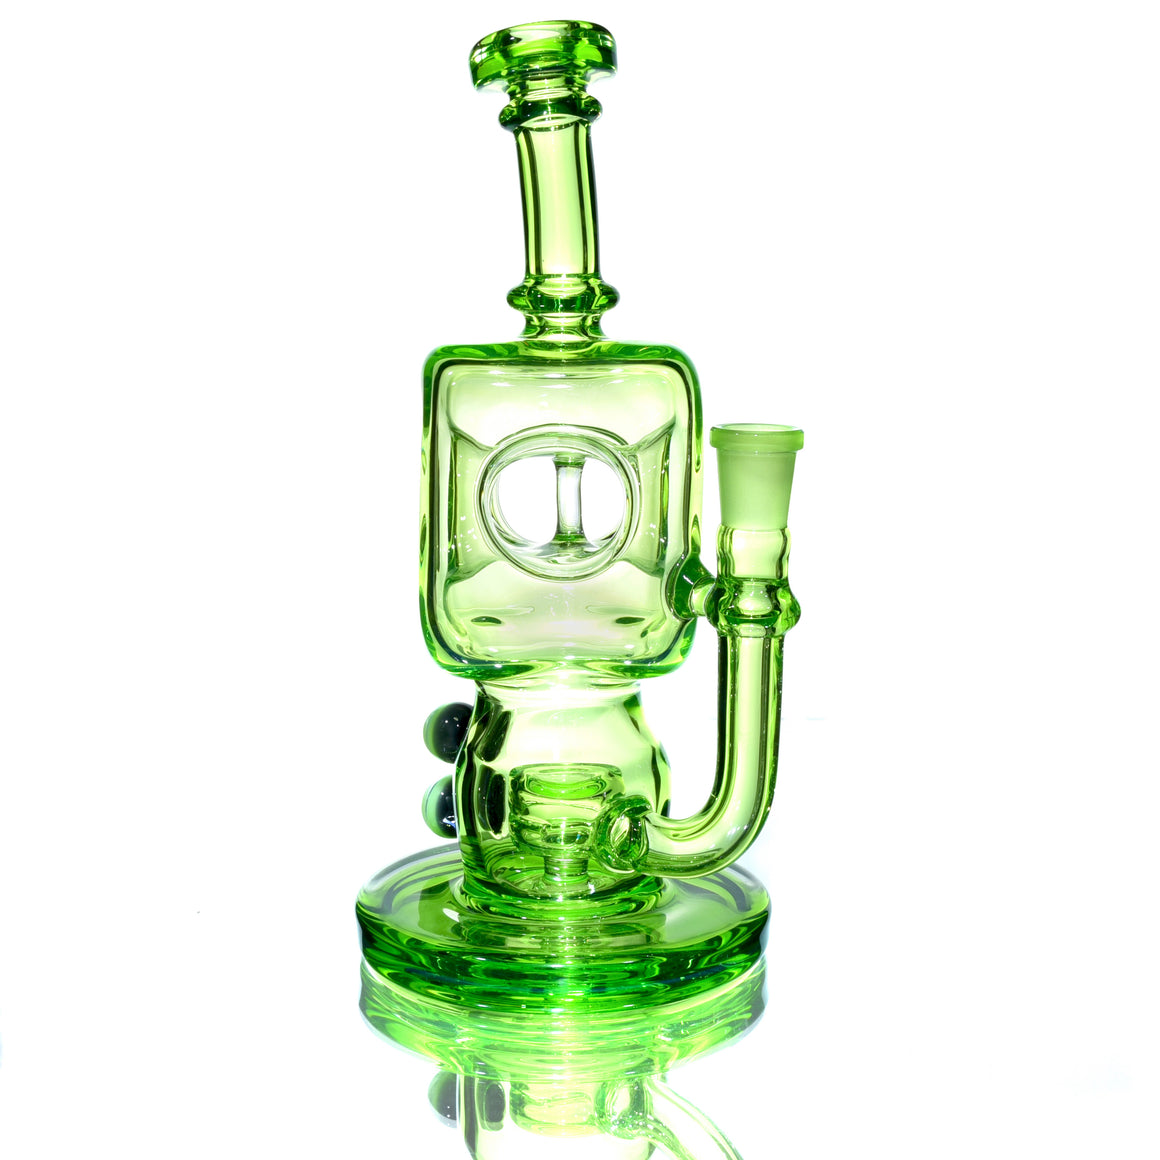 Swiss Cube Rig w/ Millies - Haterade - 14mm Female